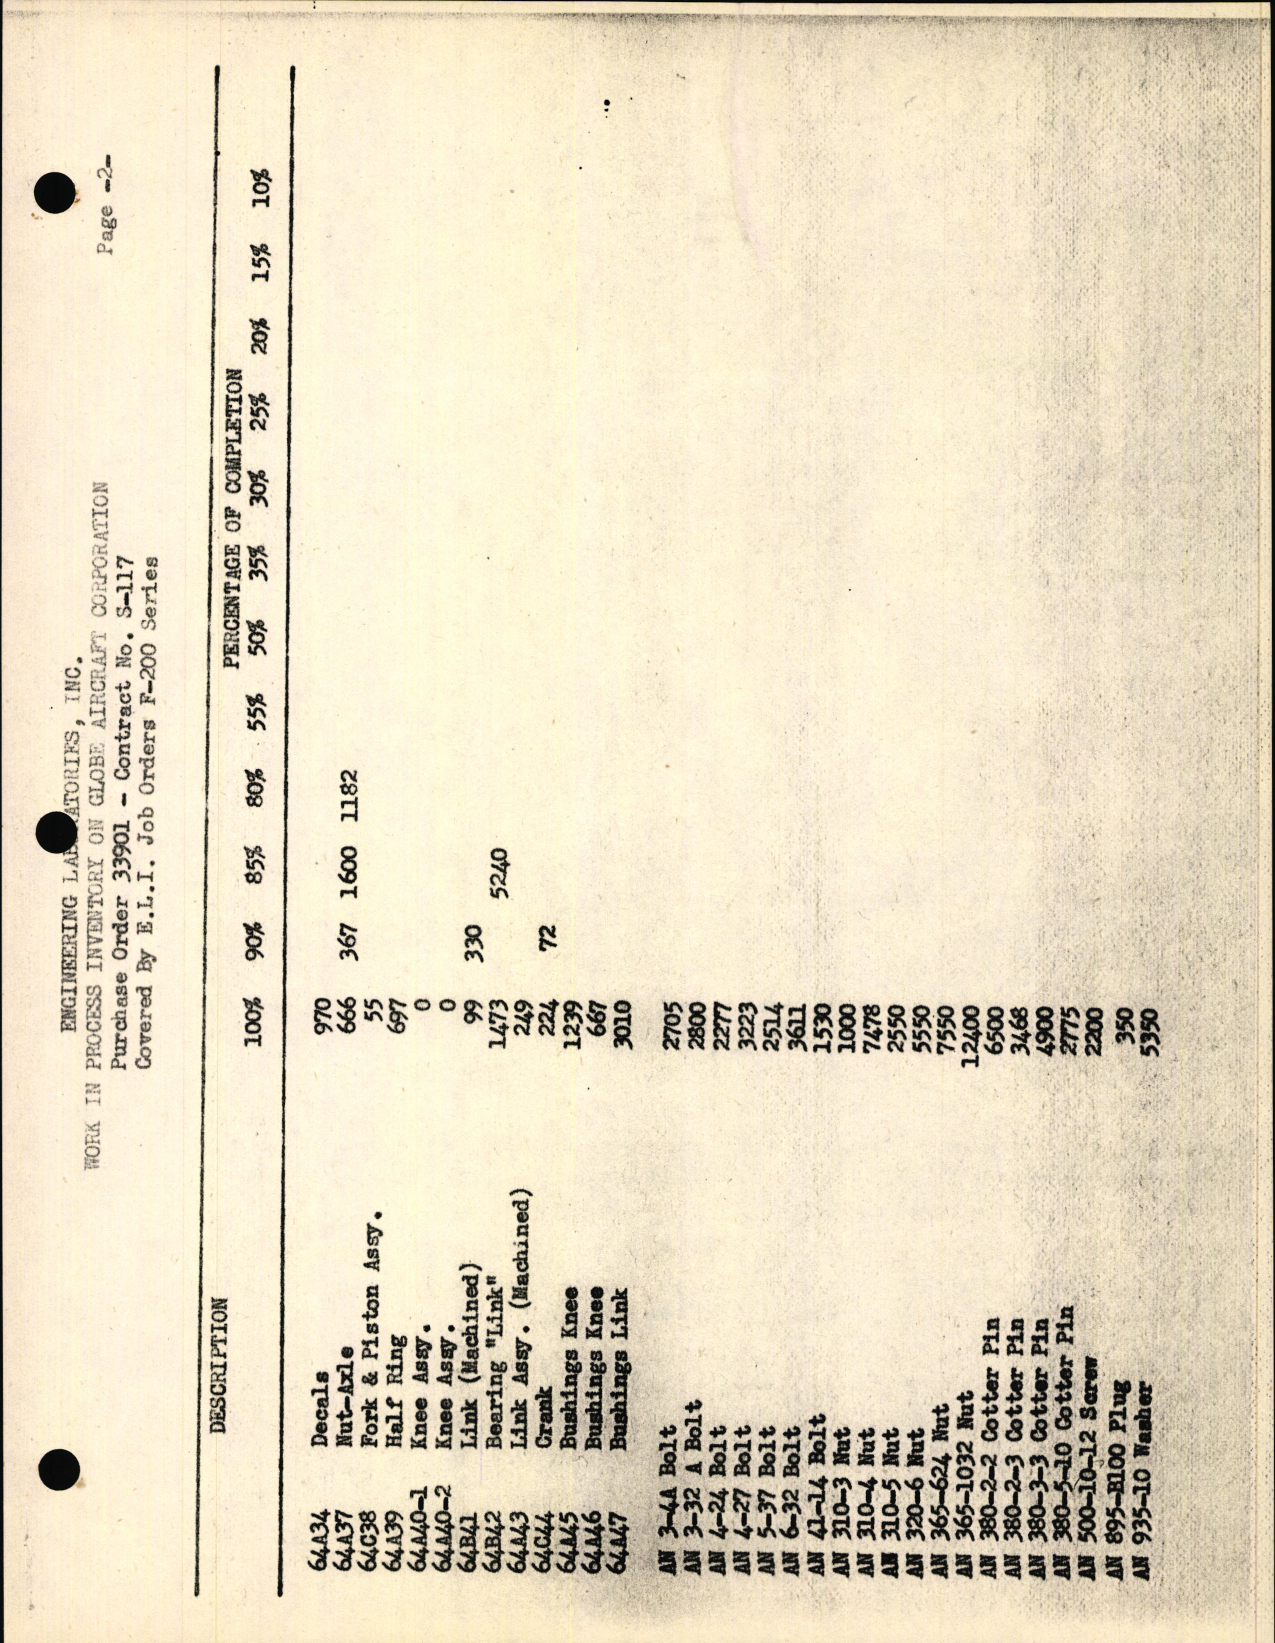 Sample page 6 from AirCorps Library document: Globe Strut Inventory and Tooling Fixtures List